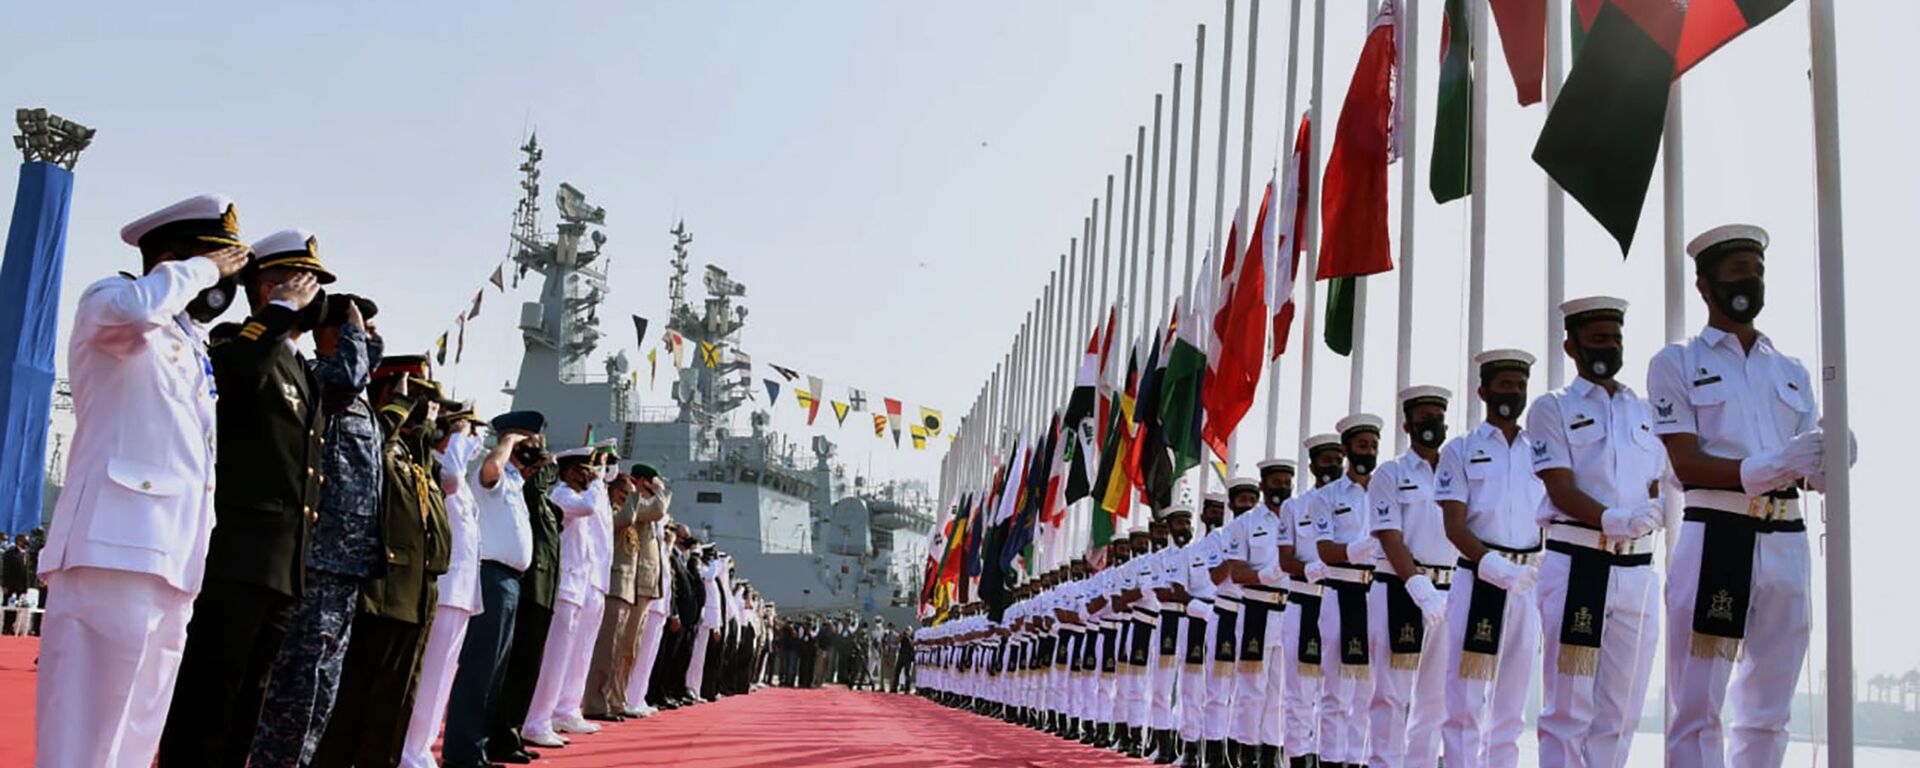 In this photo released by Pakistan Navy shows, military officials from differences countries salute during a flag hosting ceremony for multinational military exercise Aman or Peace, in Karachi, Pakistan, Friday, Feb. 12, 2021. Pakistan's Navy kicked off a five-day multinational military exercise in the Arabian Sea on Friday as part of Islamabad's years-long effort to bring security to the area, it said, although as usual regional archrival India was not invited. - Sputnik International, 1920, 14.02.2021